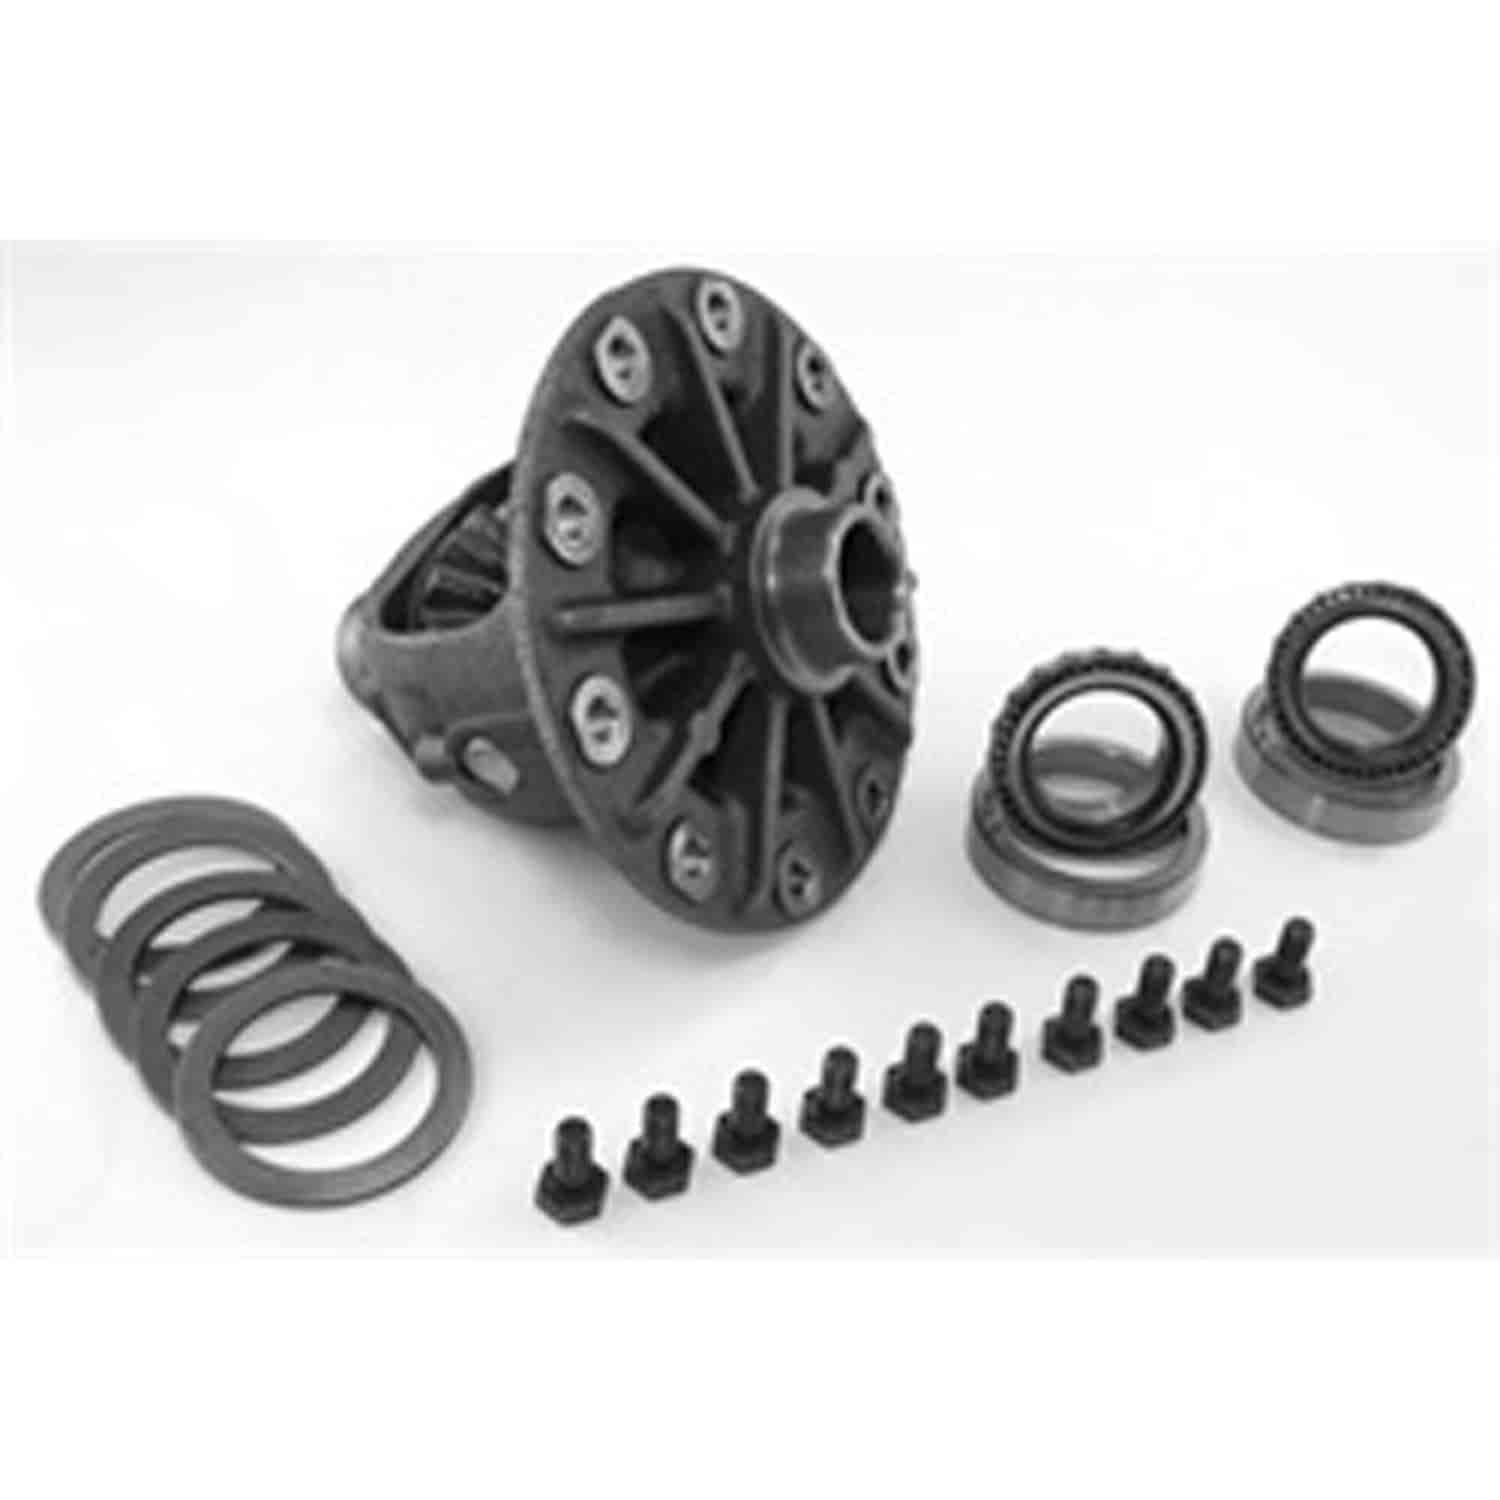 This differential case assembly kit from Omix-ADA is